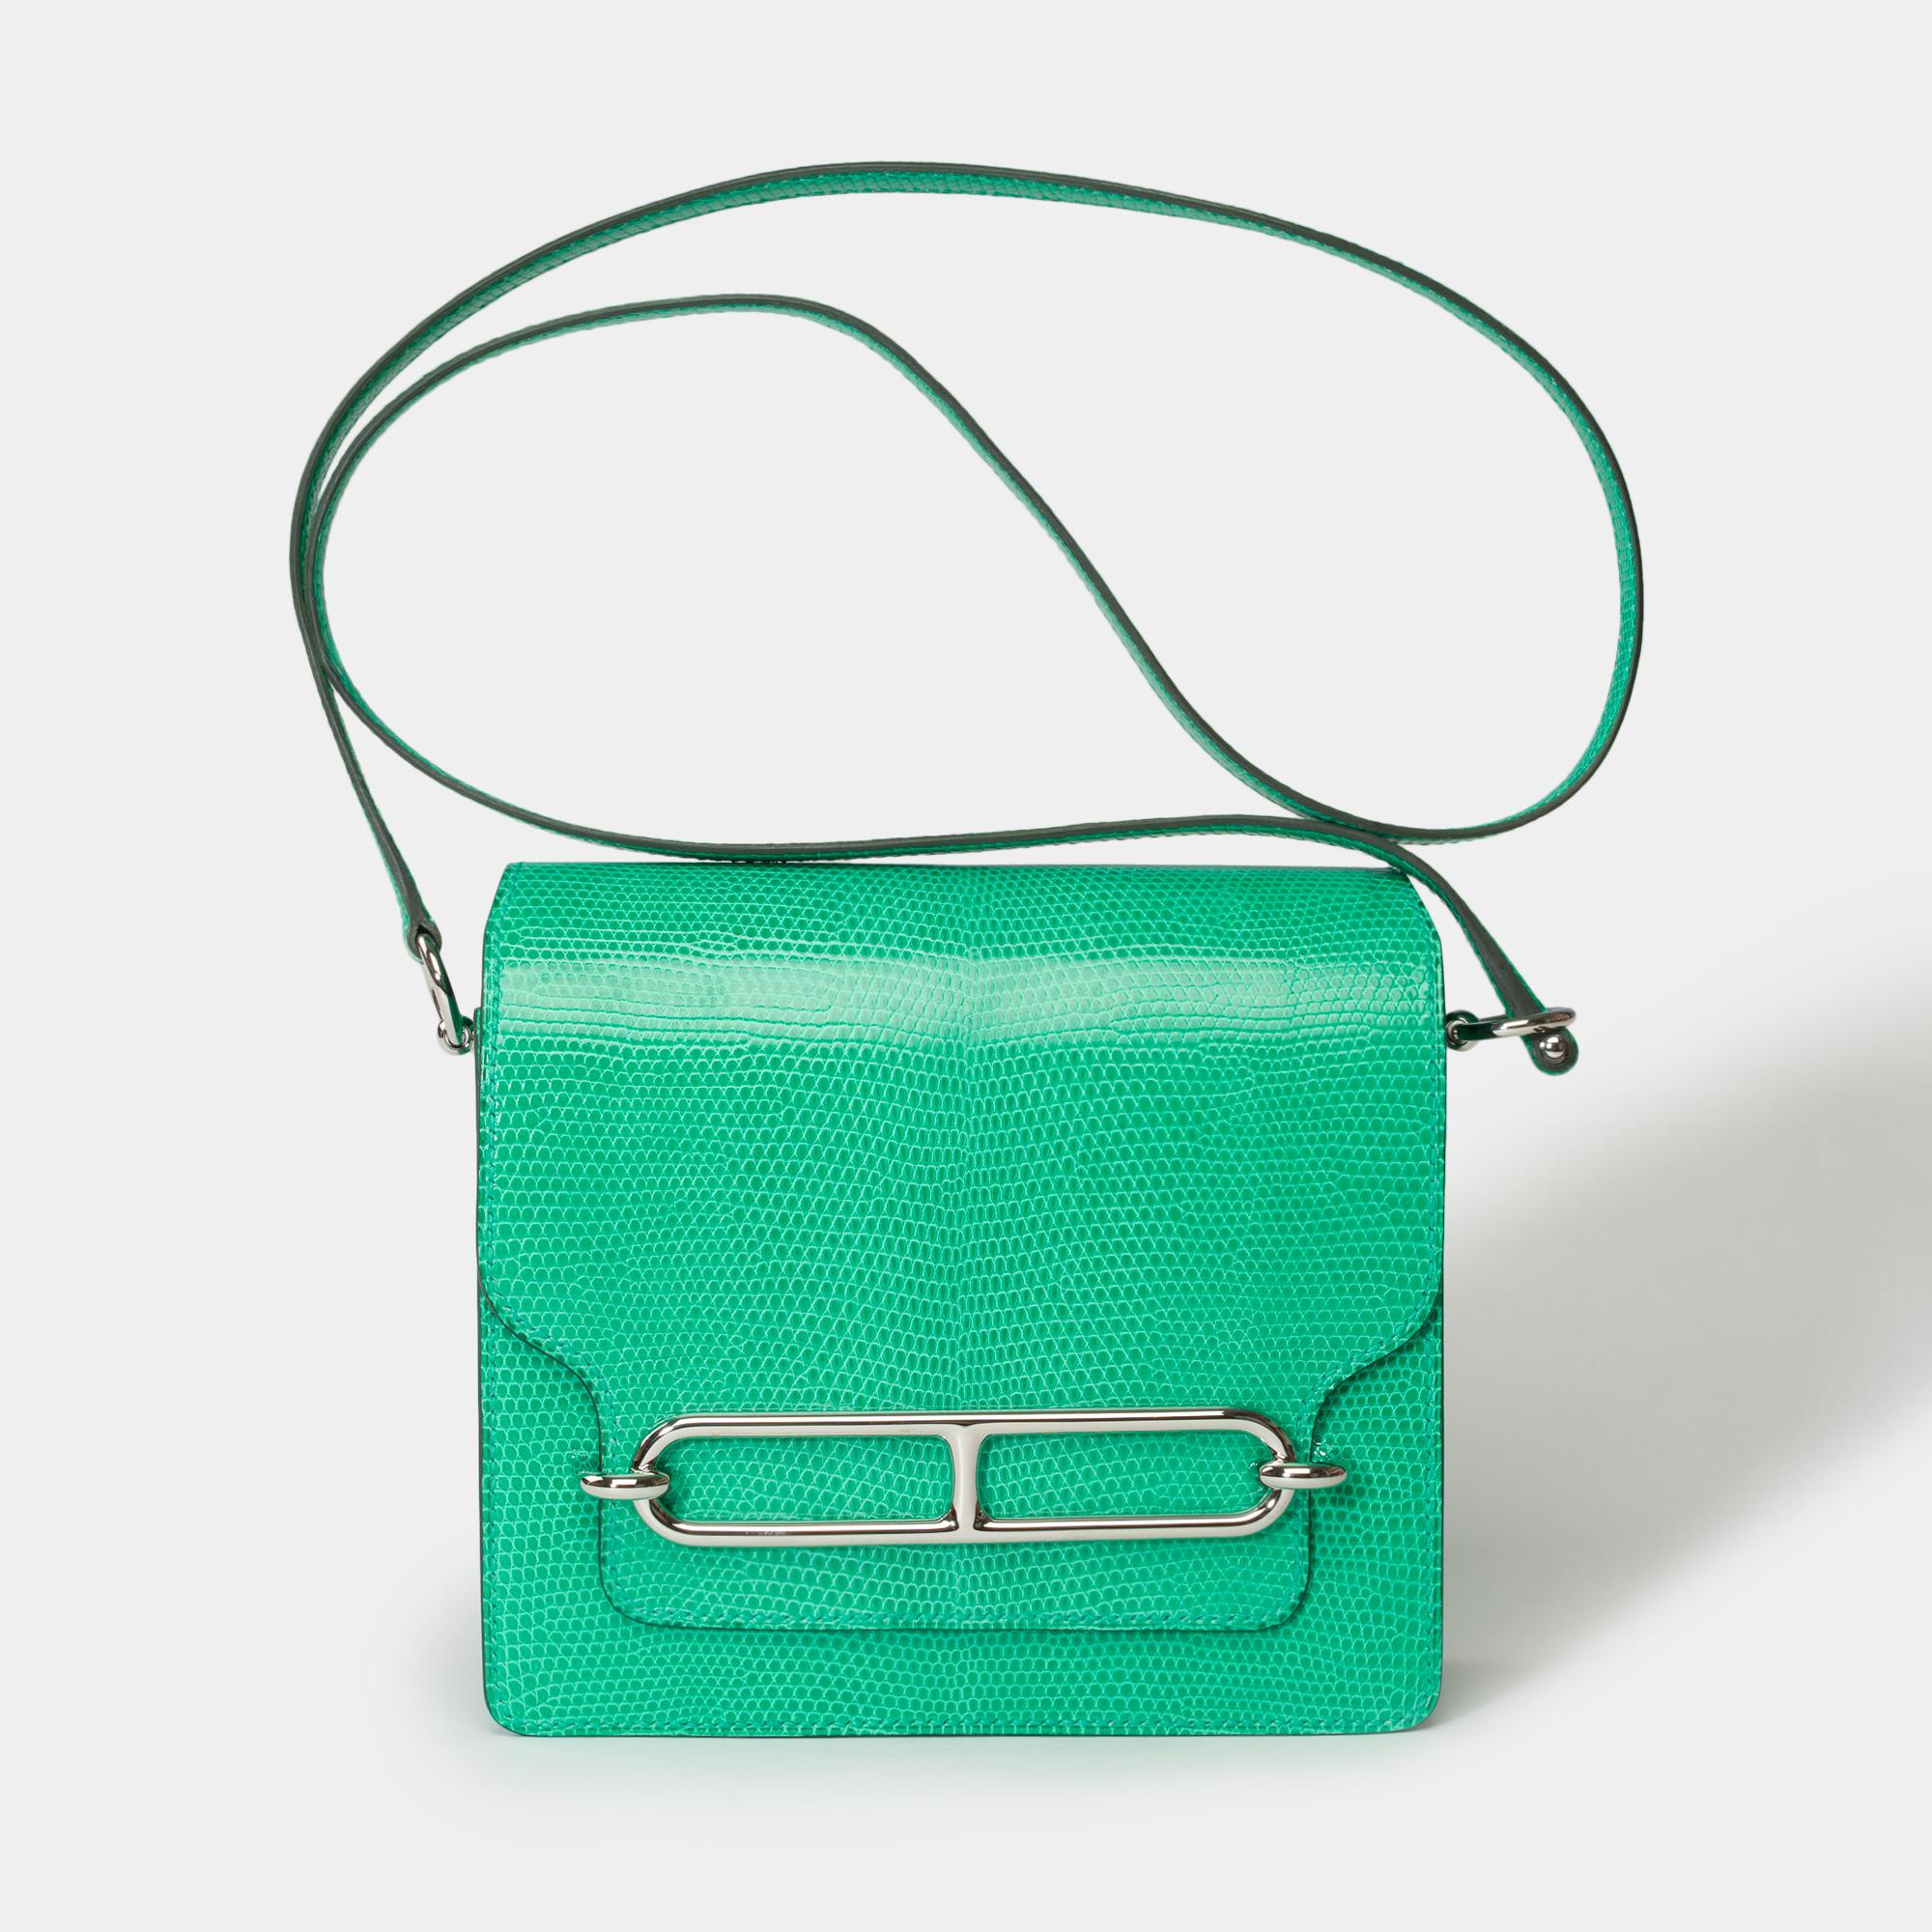 Amazing​ ​Roulis​ ​shoulder​ ​bag​ ​in​ ​mint​ ​green​ ​lizard,​ ​palladium​ ​silver​ ​metal​ ​trim,​ ​green​ ​lizard​ ​shoulder​ ​strap​ ​for​ ​a​ ​hand​ ​or​ ​shoulder​ ​or​ ​crossbody​ ​carry

Flap​ ​closure​ ​with​ ​palladium​ ​silver​ ​ink​